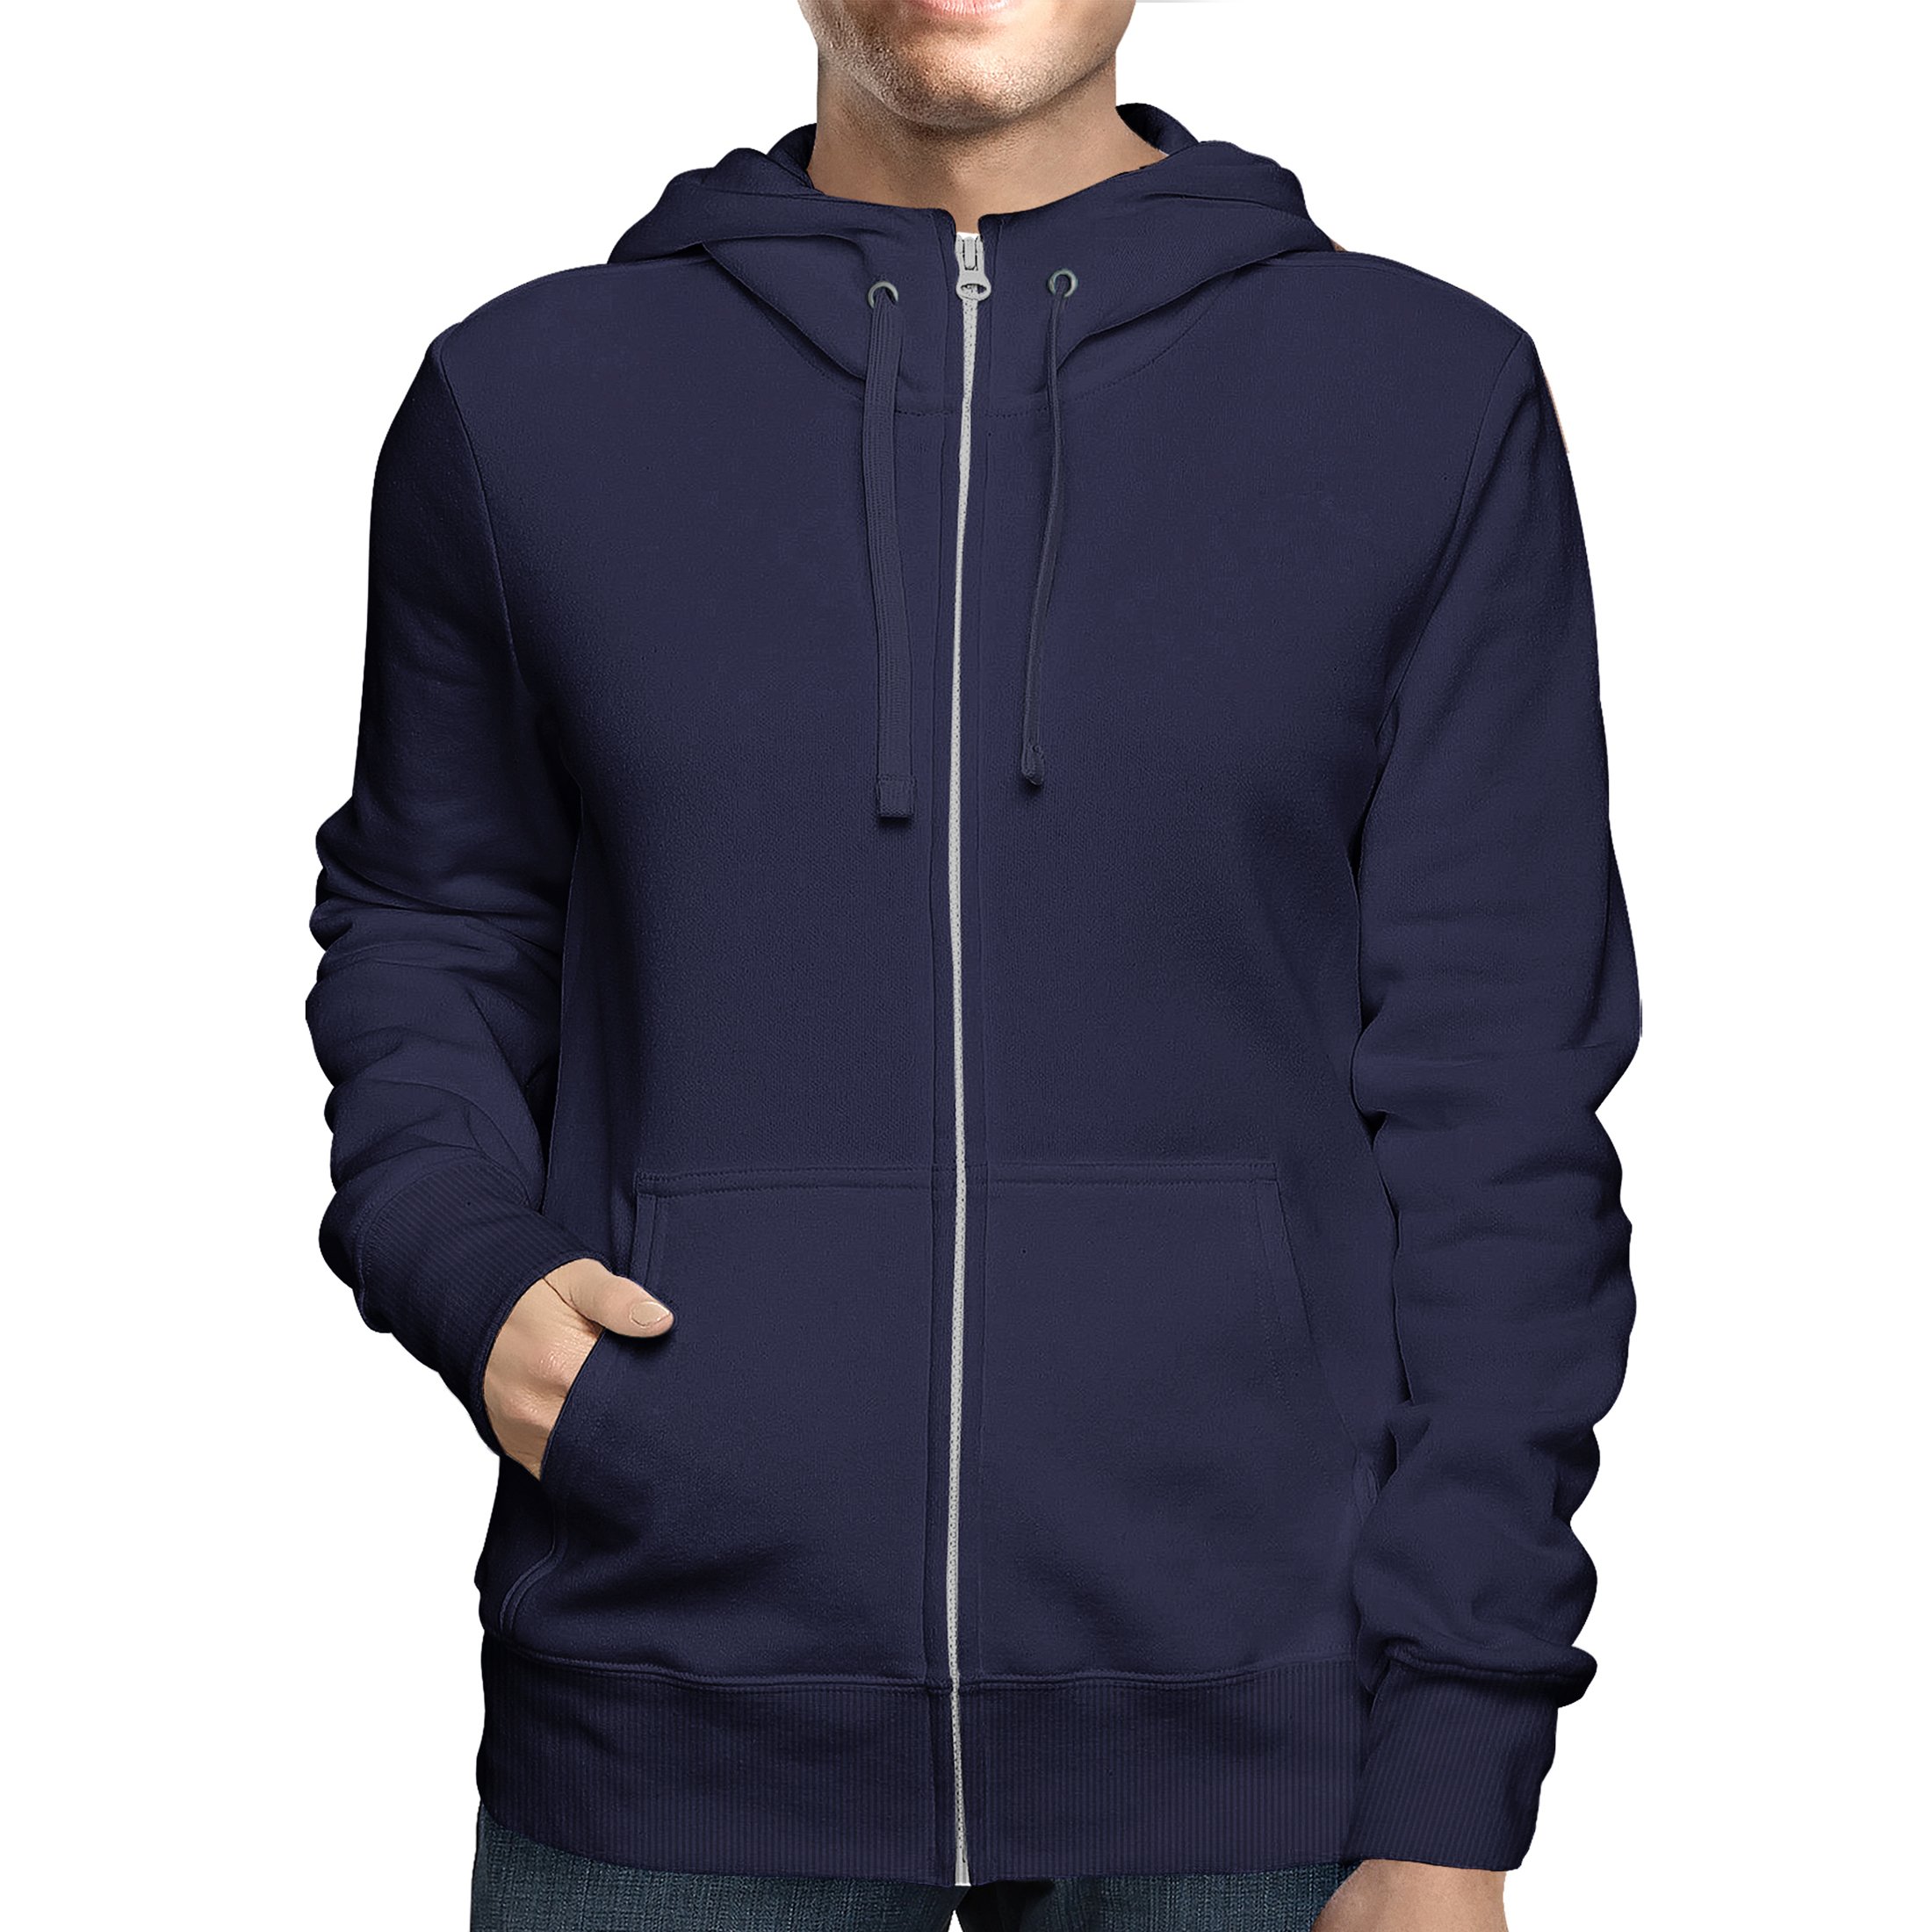 2-Pack: Men's Full Zip Up Fleece-Lined Hoodie Sweatshirt (Big & Tall Size Available) - Navy, X-large